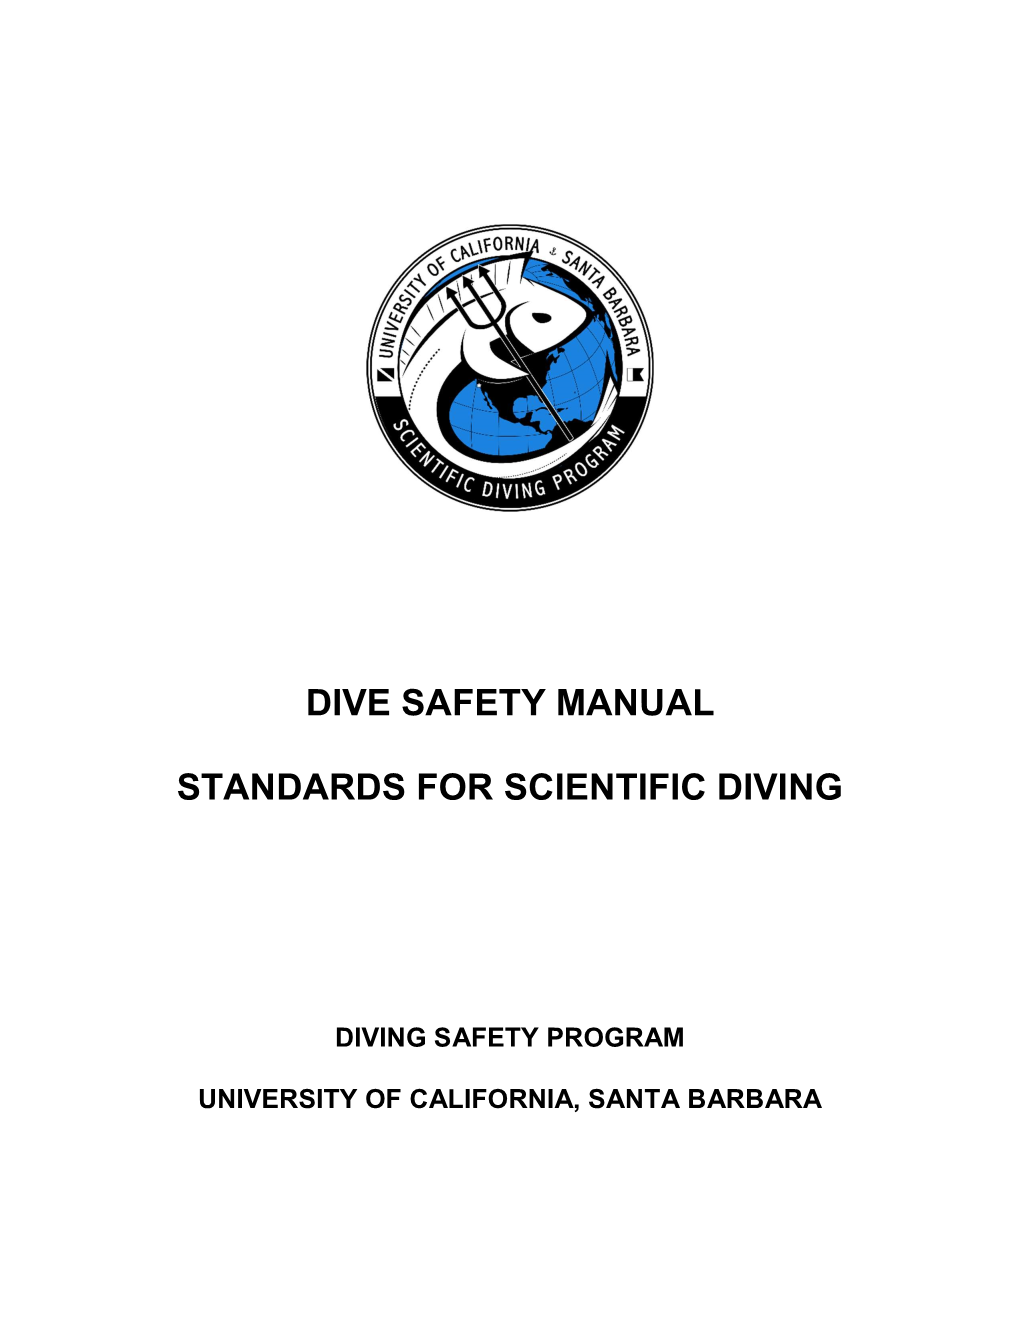 Dive Safety Manual Standards for Scientific Diving